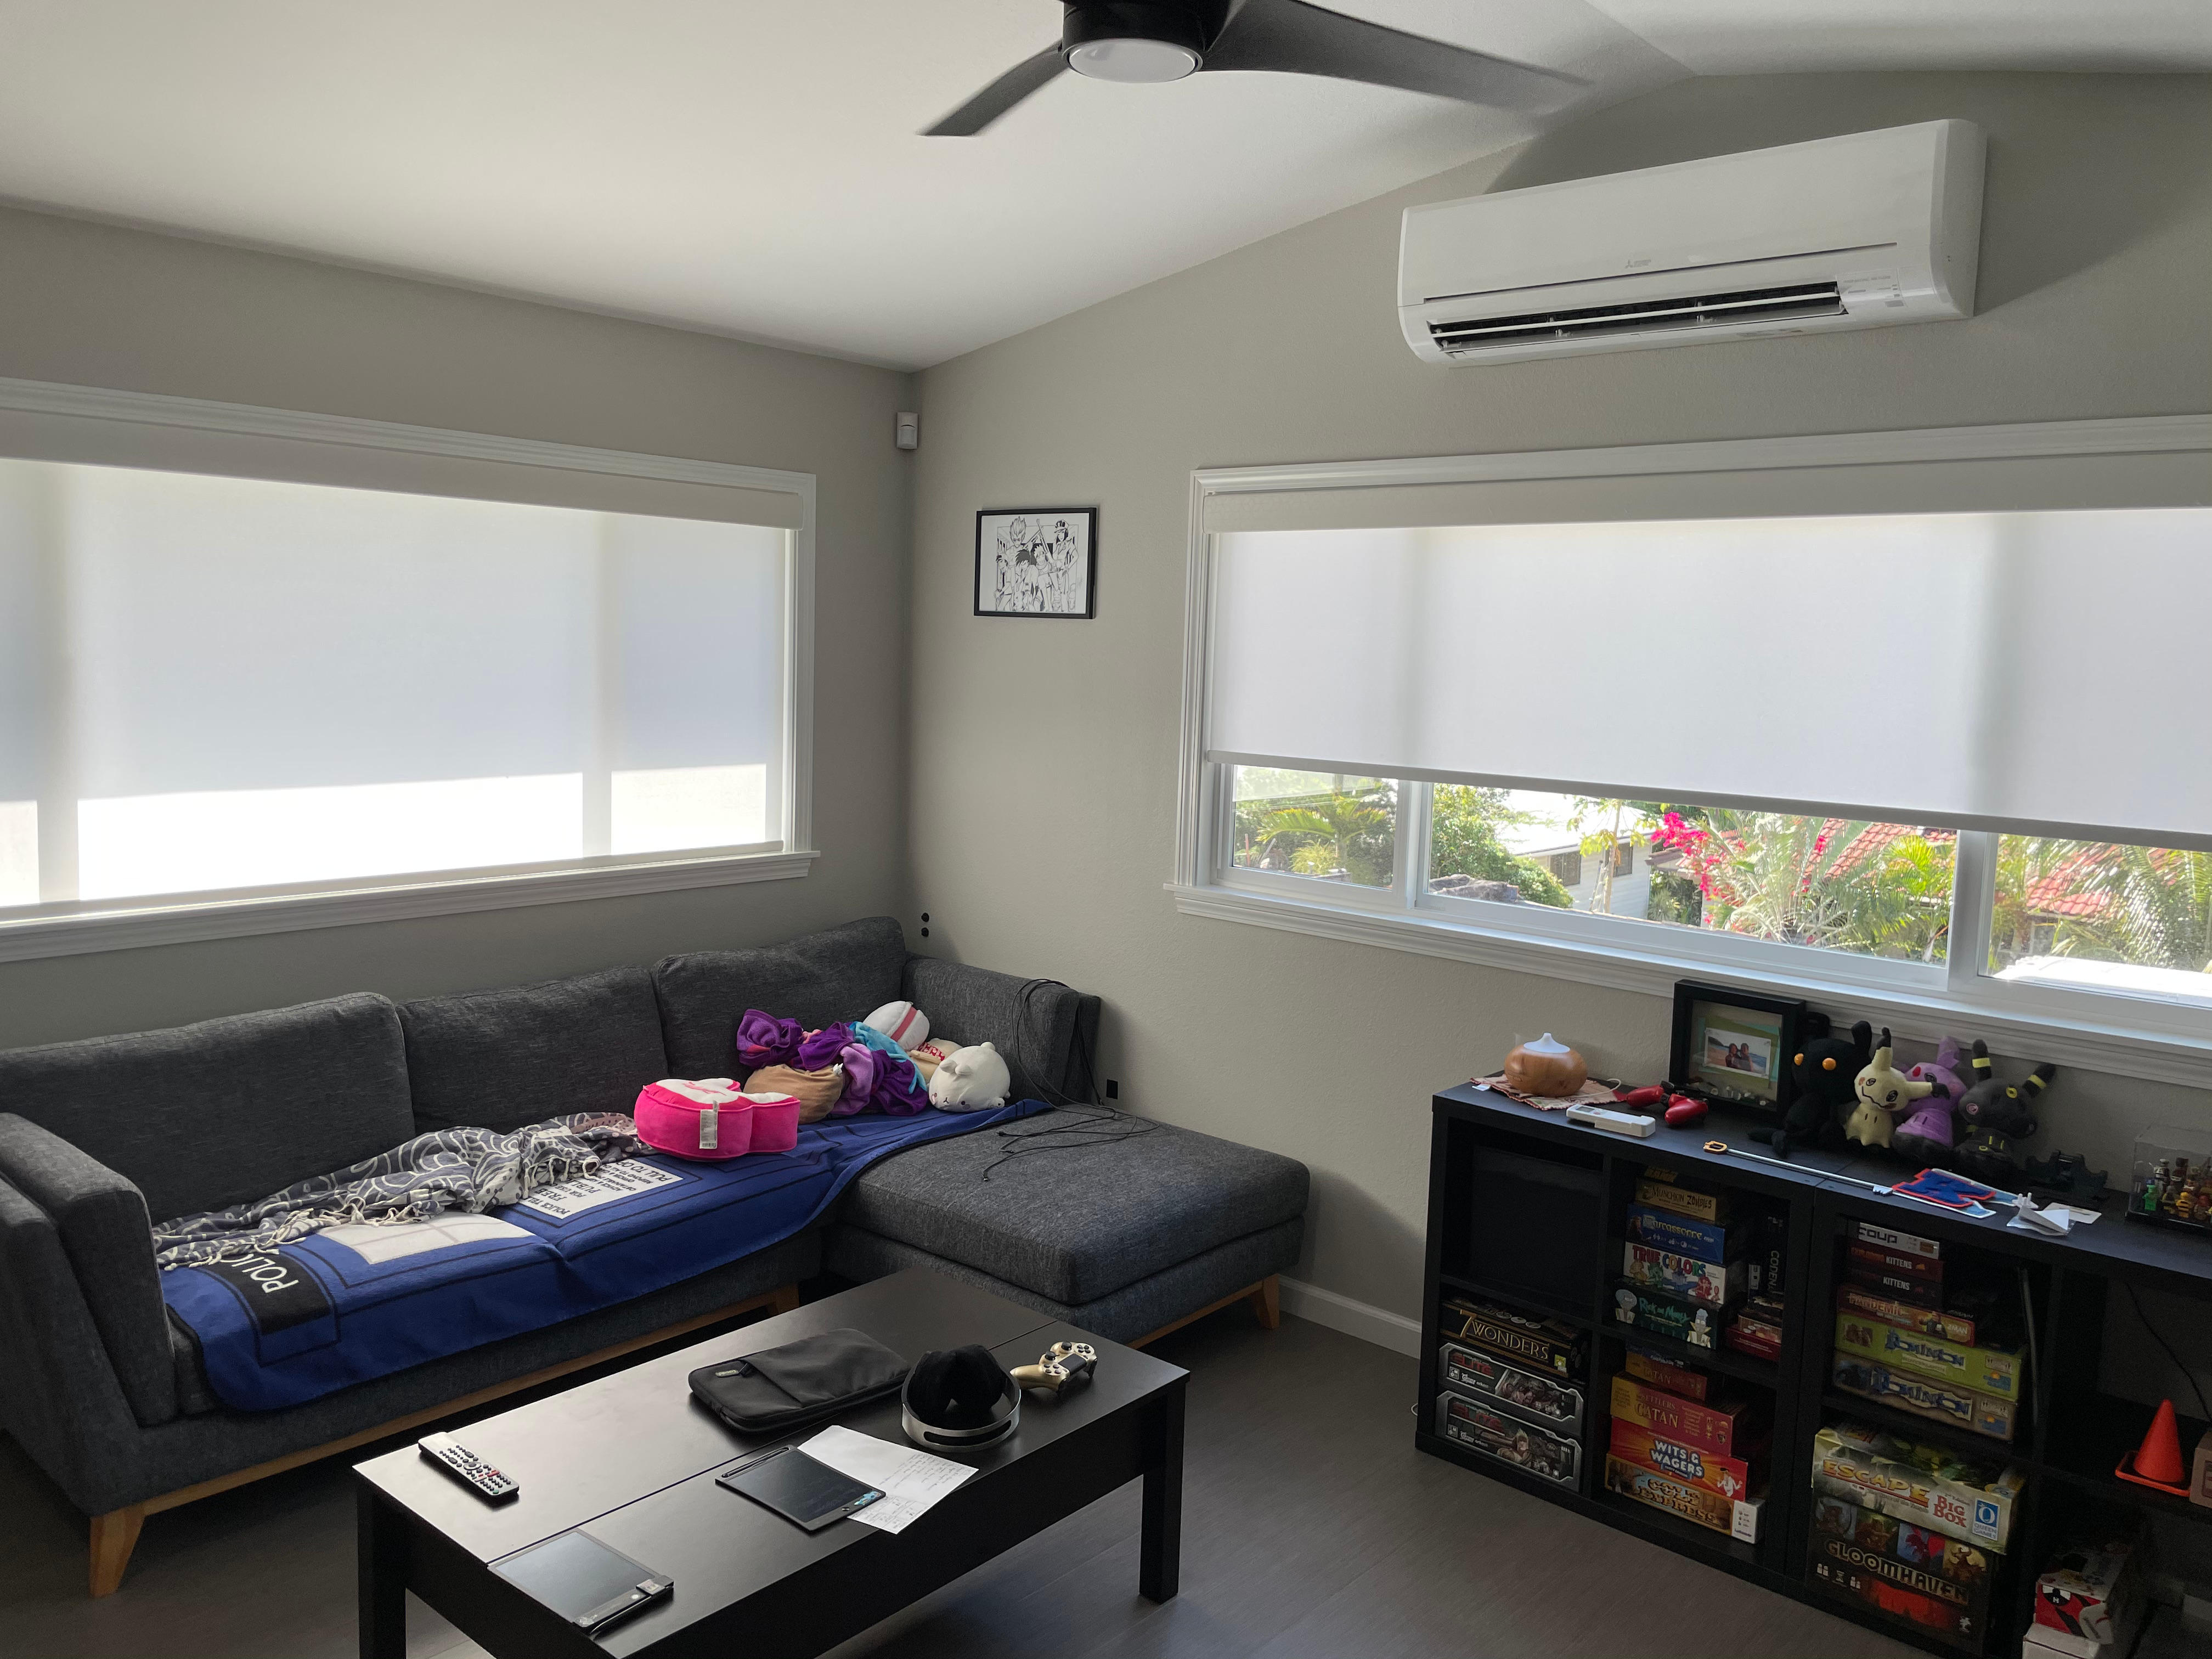 Beautiful light filtering roller shades in Kailua remodel